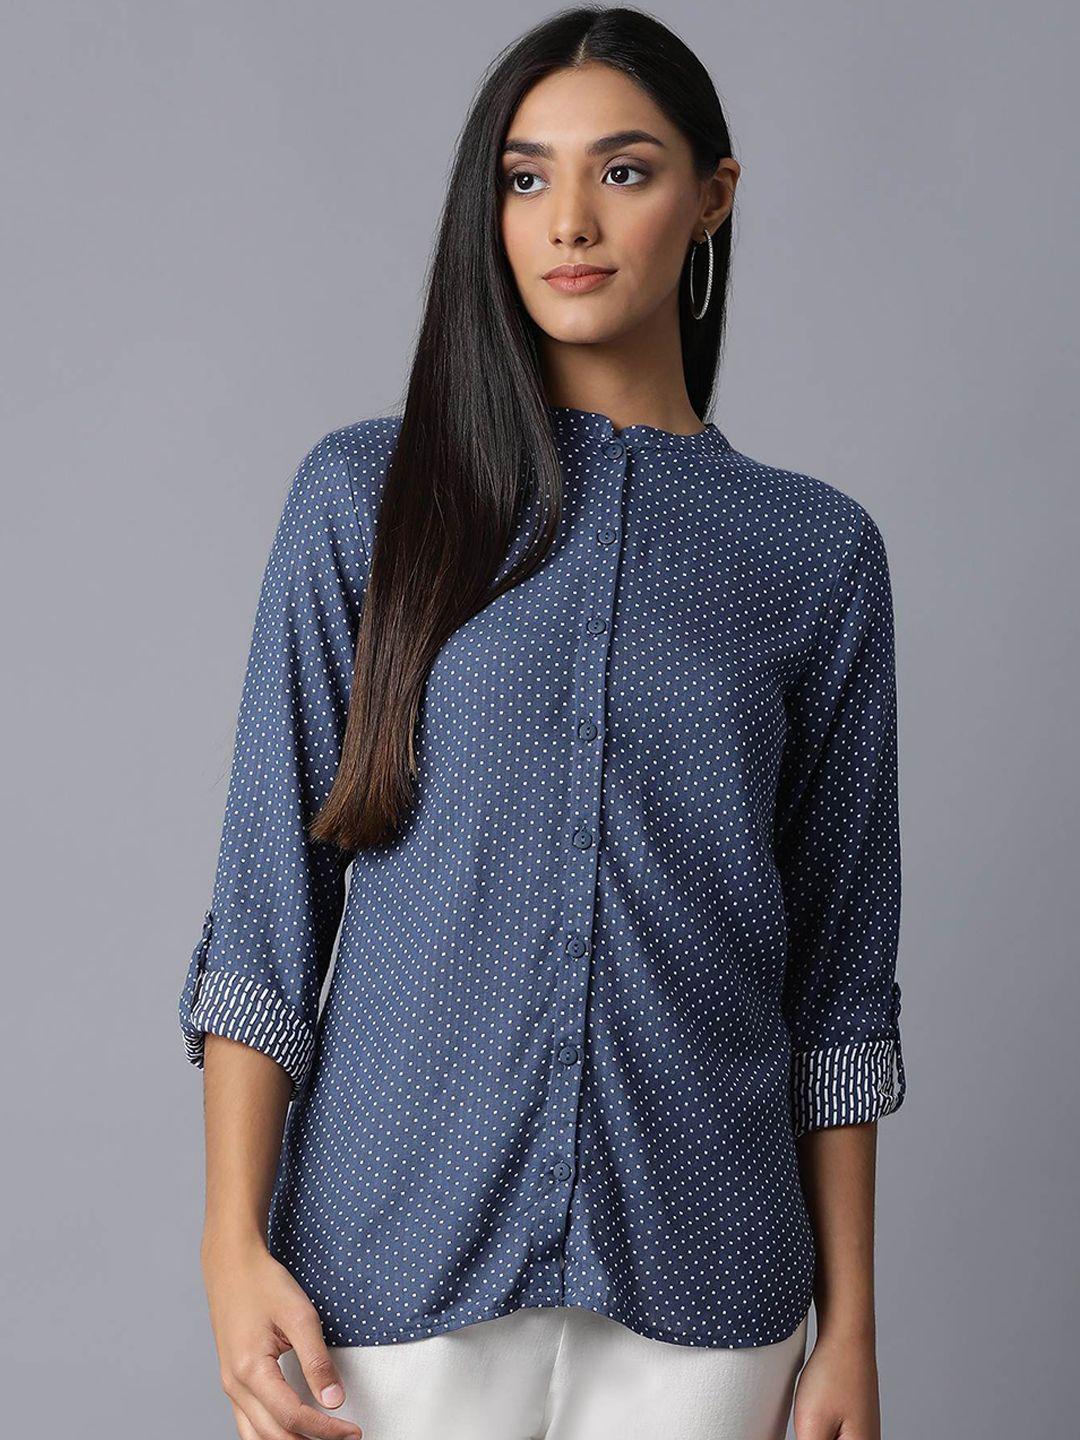 w-women-blue-and-white-polka-dots-printed-casual-shirt